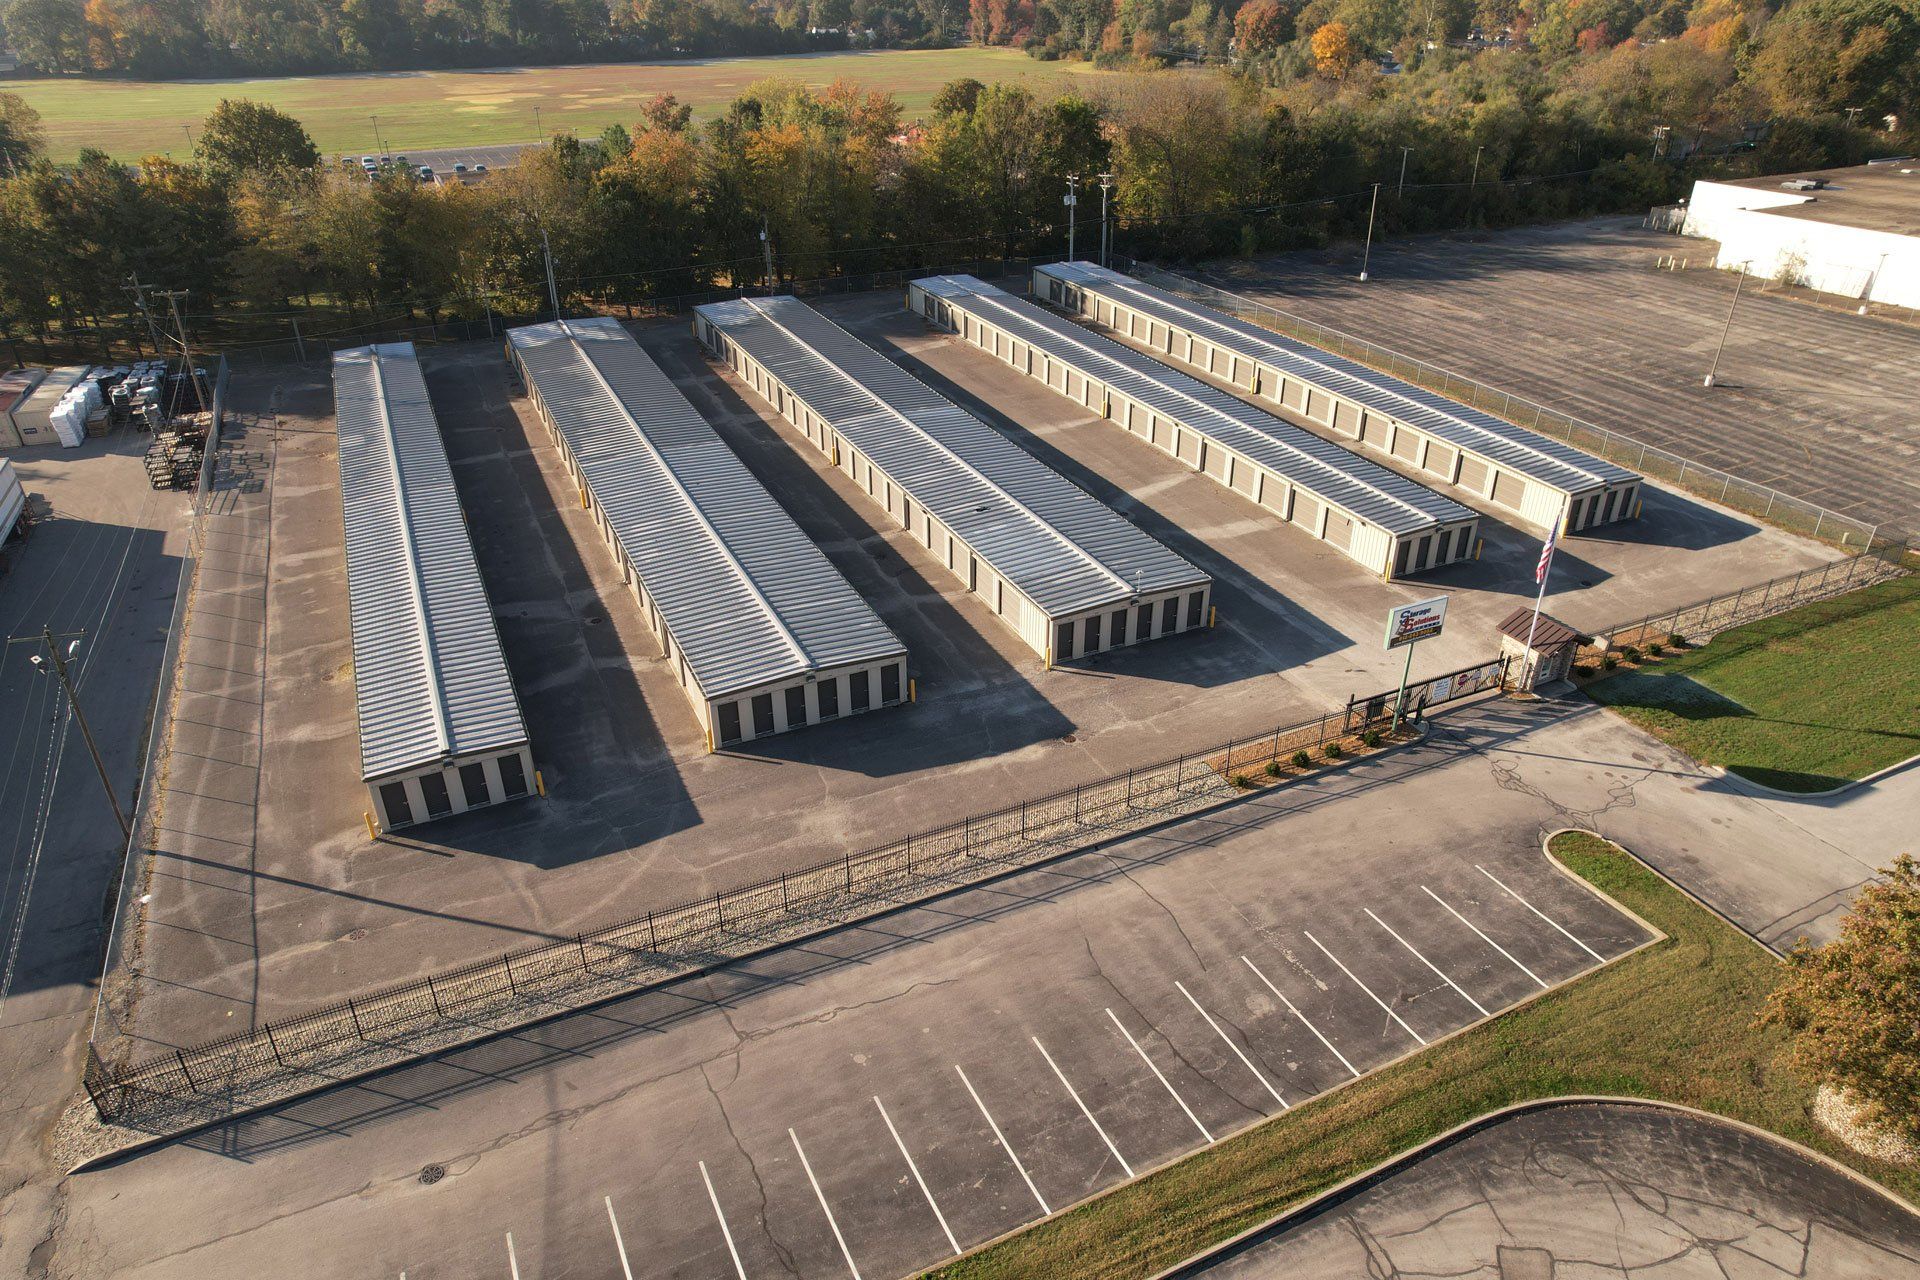 Storage Facility — Wabash Country in Haute, IN